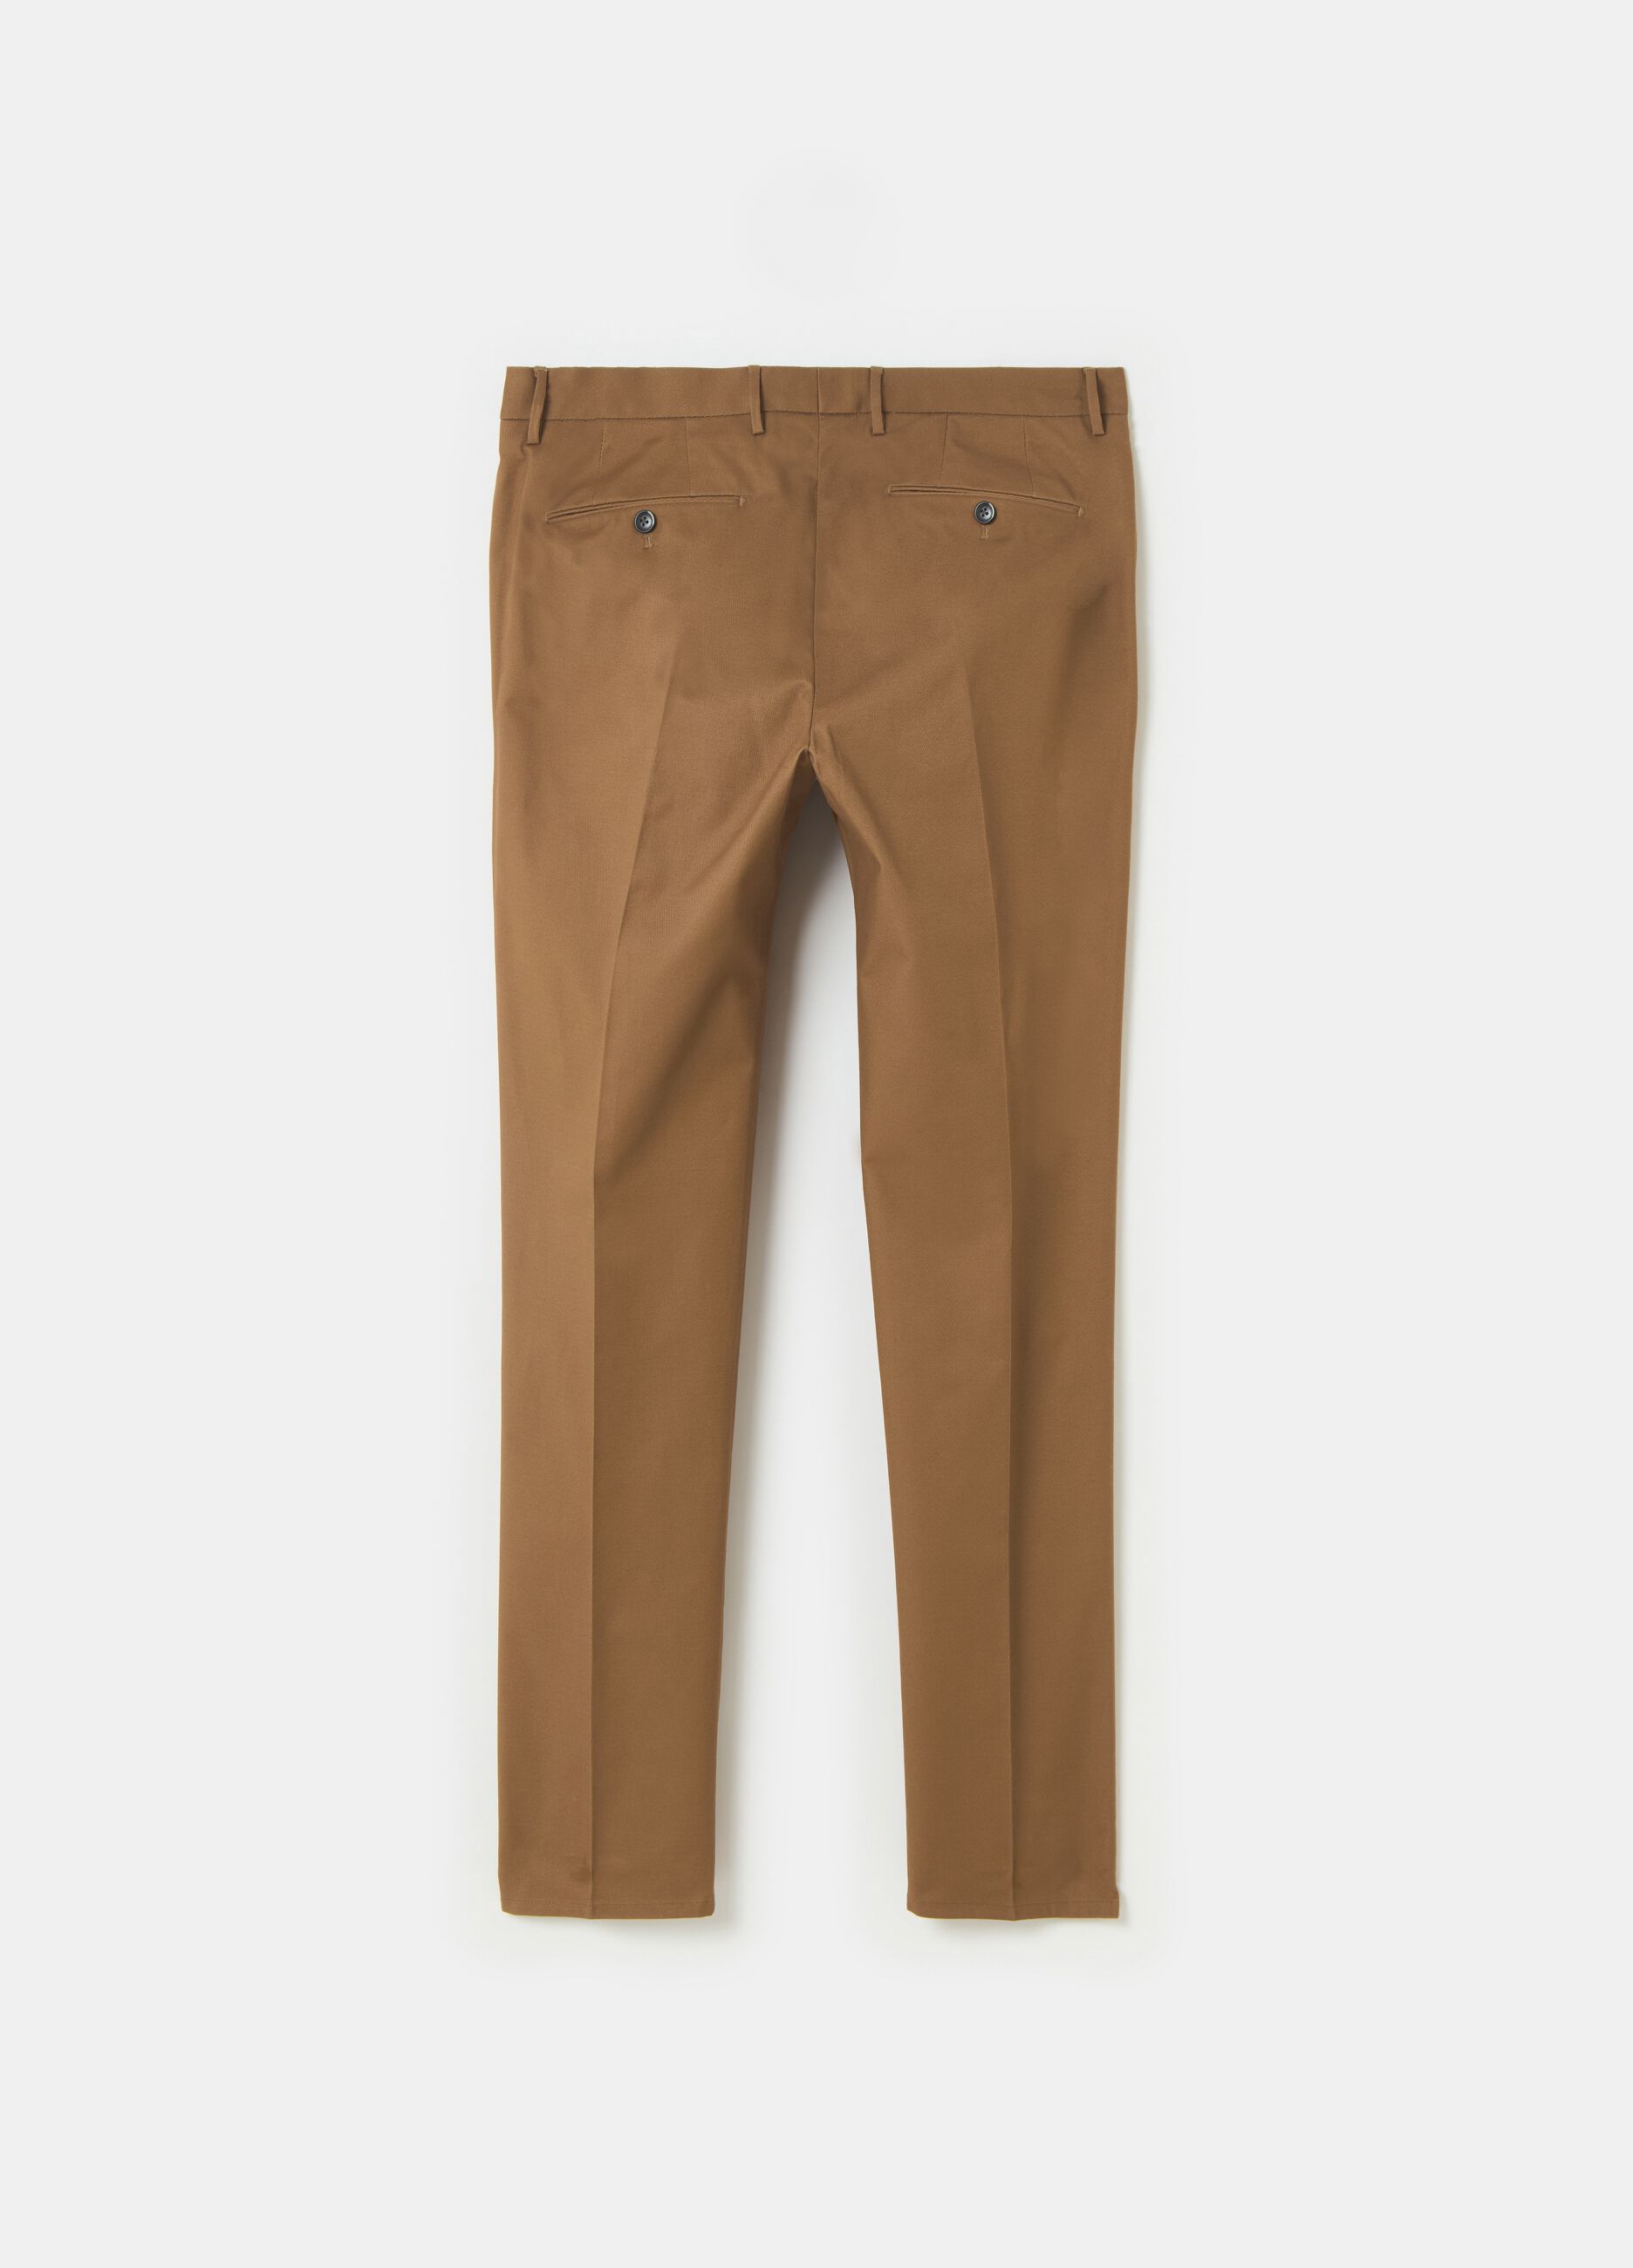 Contemporary chino trousers with darts